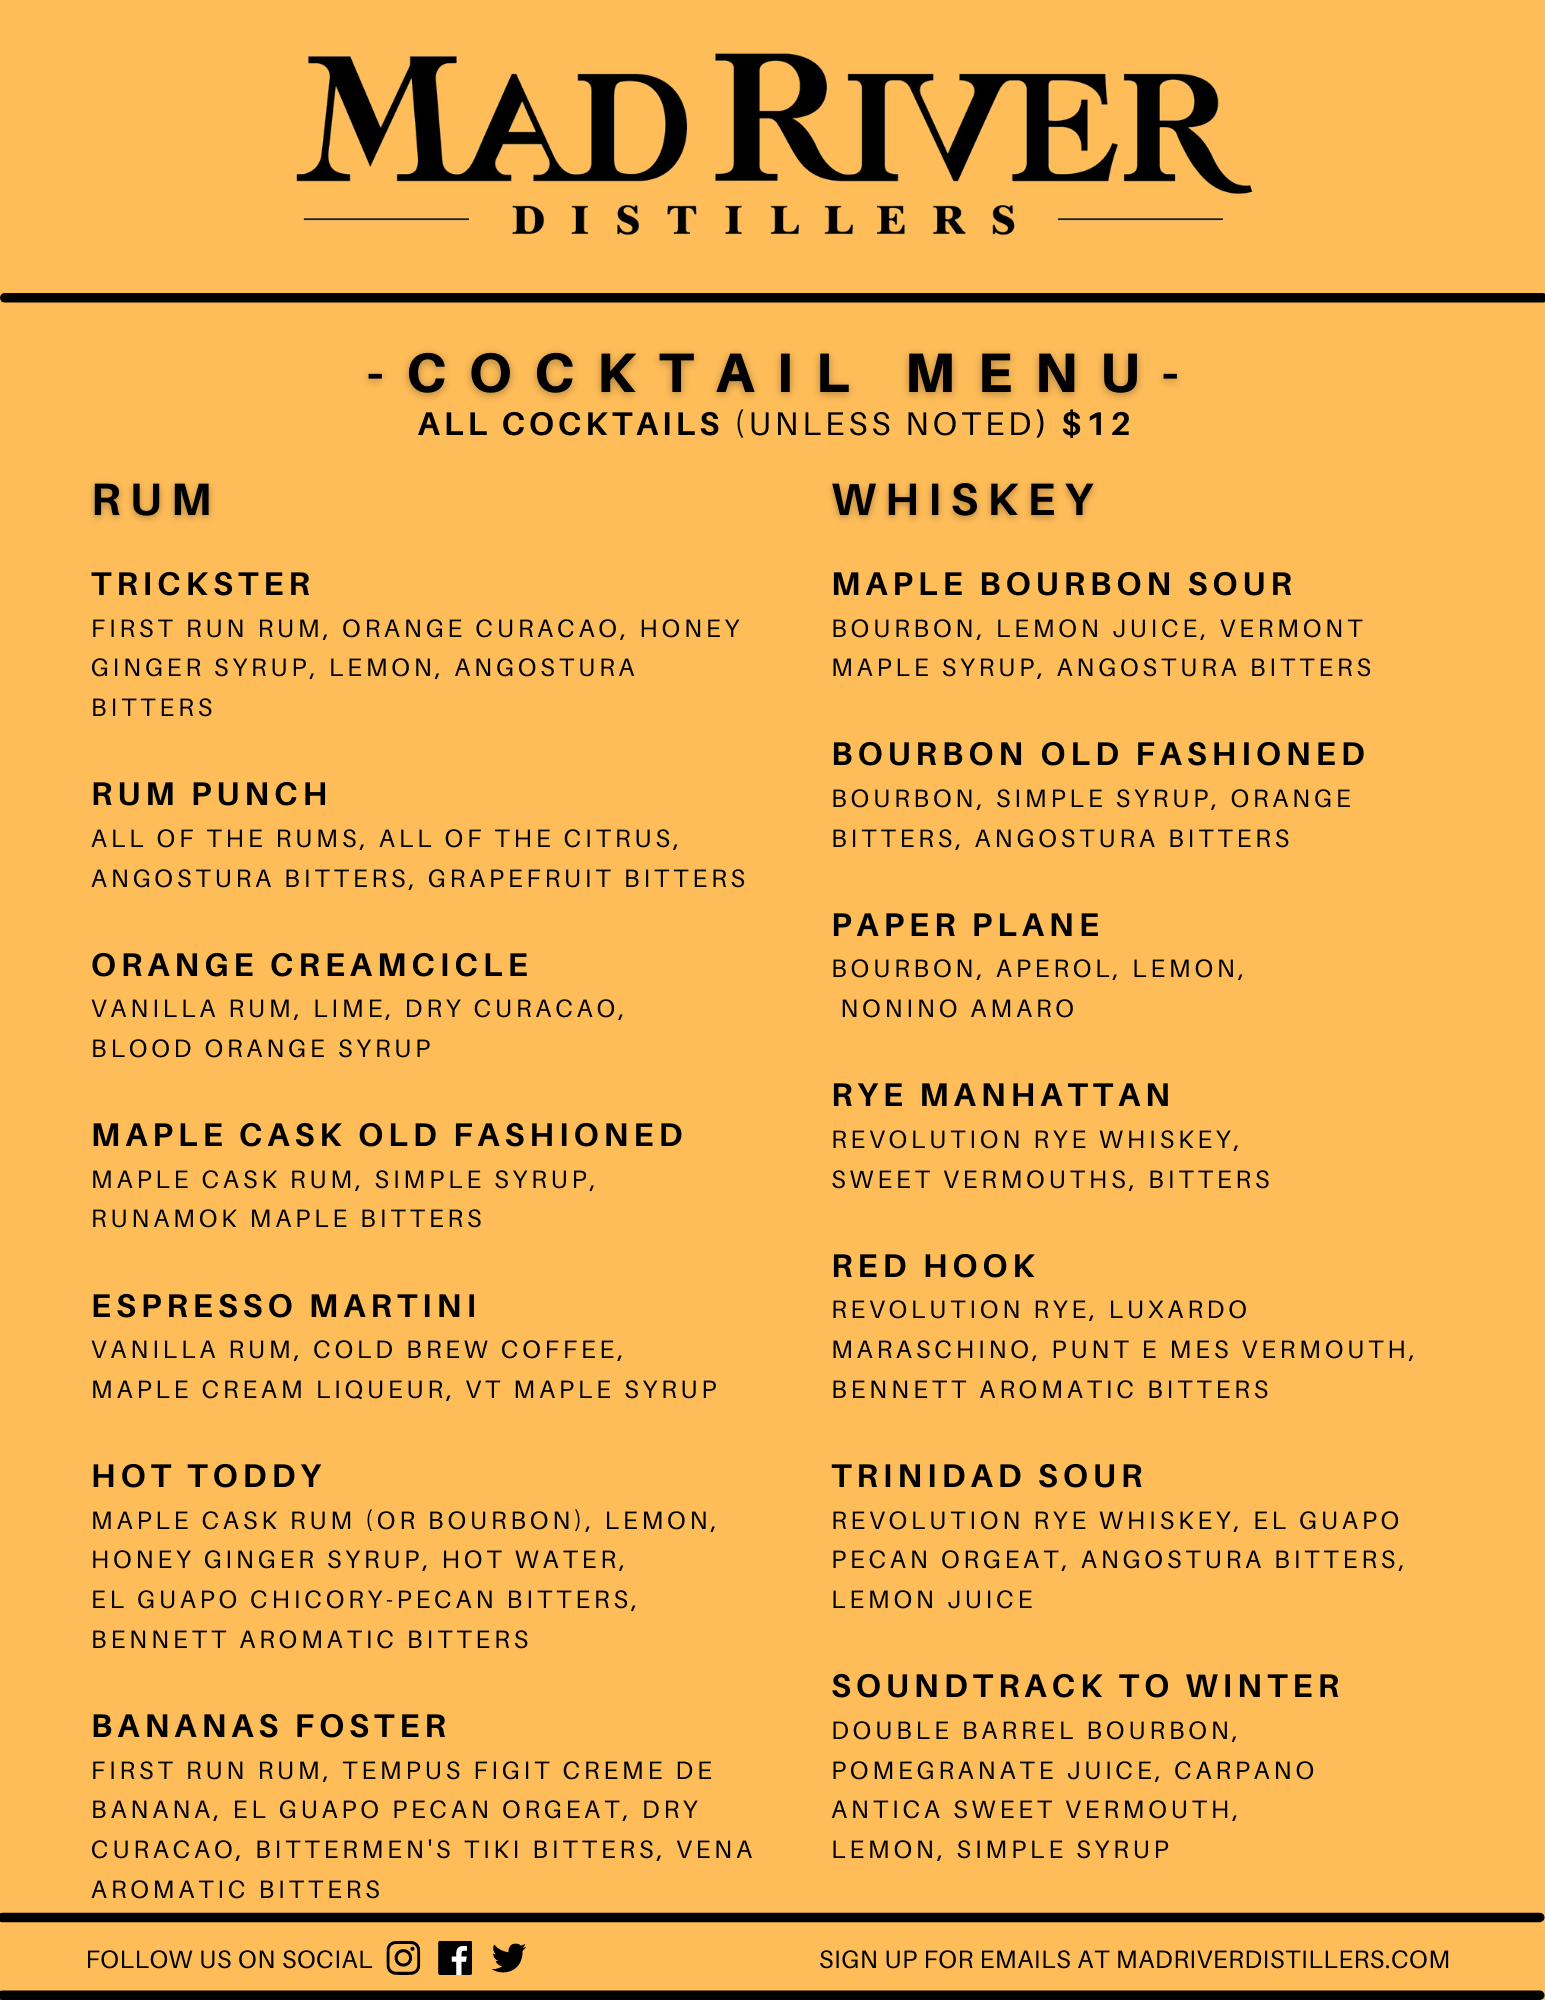 Current cocktail menu includes: Trickster, Rum Punch, Orange Creamcicle, Maple Cask Old Fashioned, Espresso Martini, Hot Toddy, Bananas Foster, Maple Bourbon Sour, Bourbon Old Fashioned, Paper Plane, Rye Manhattan, Red Hook, Trinidad Sour, Soundtrack to Winter